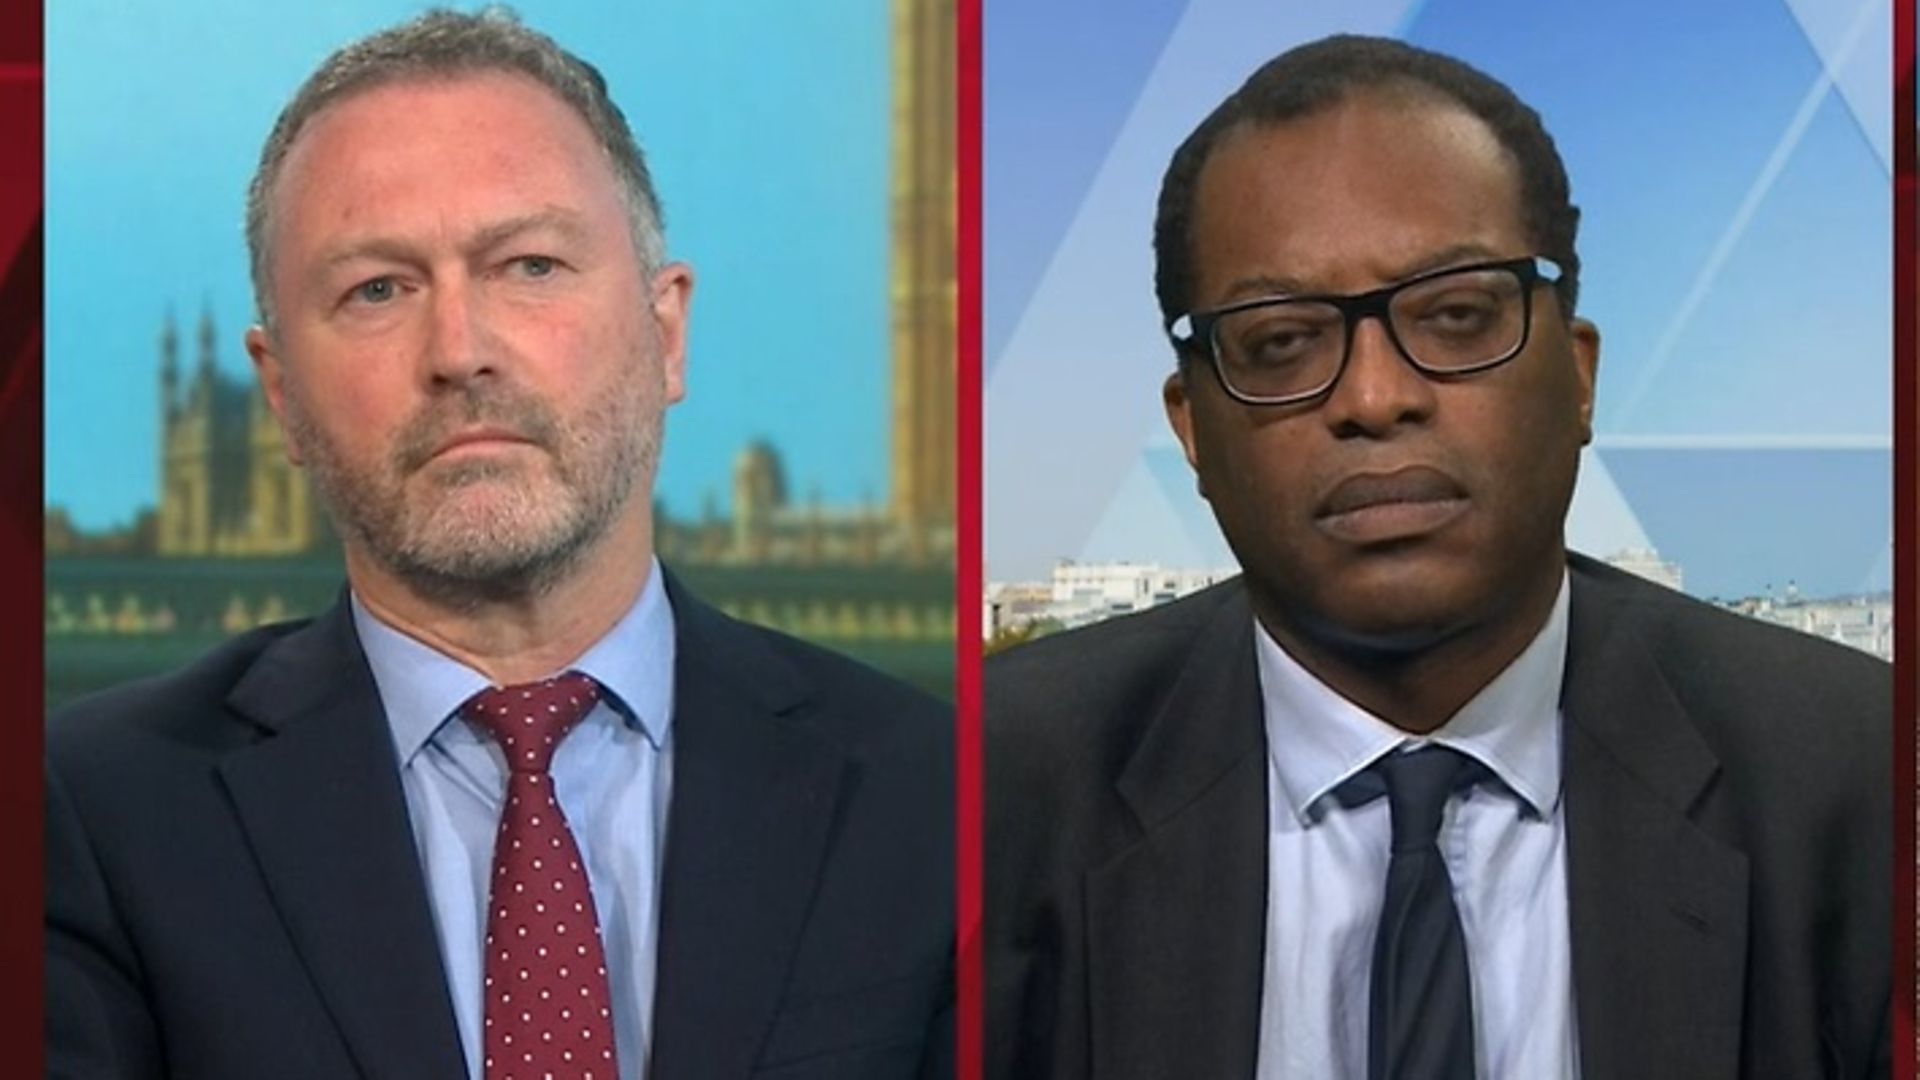 Steve Reed clashes with Kwasi Kwarteng over spending on PPE - Credit: BBC